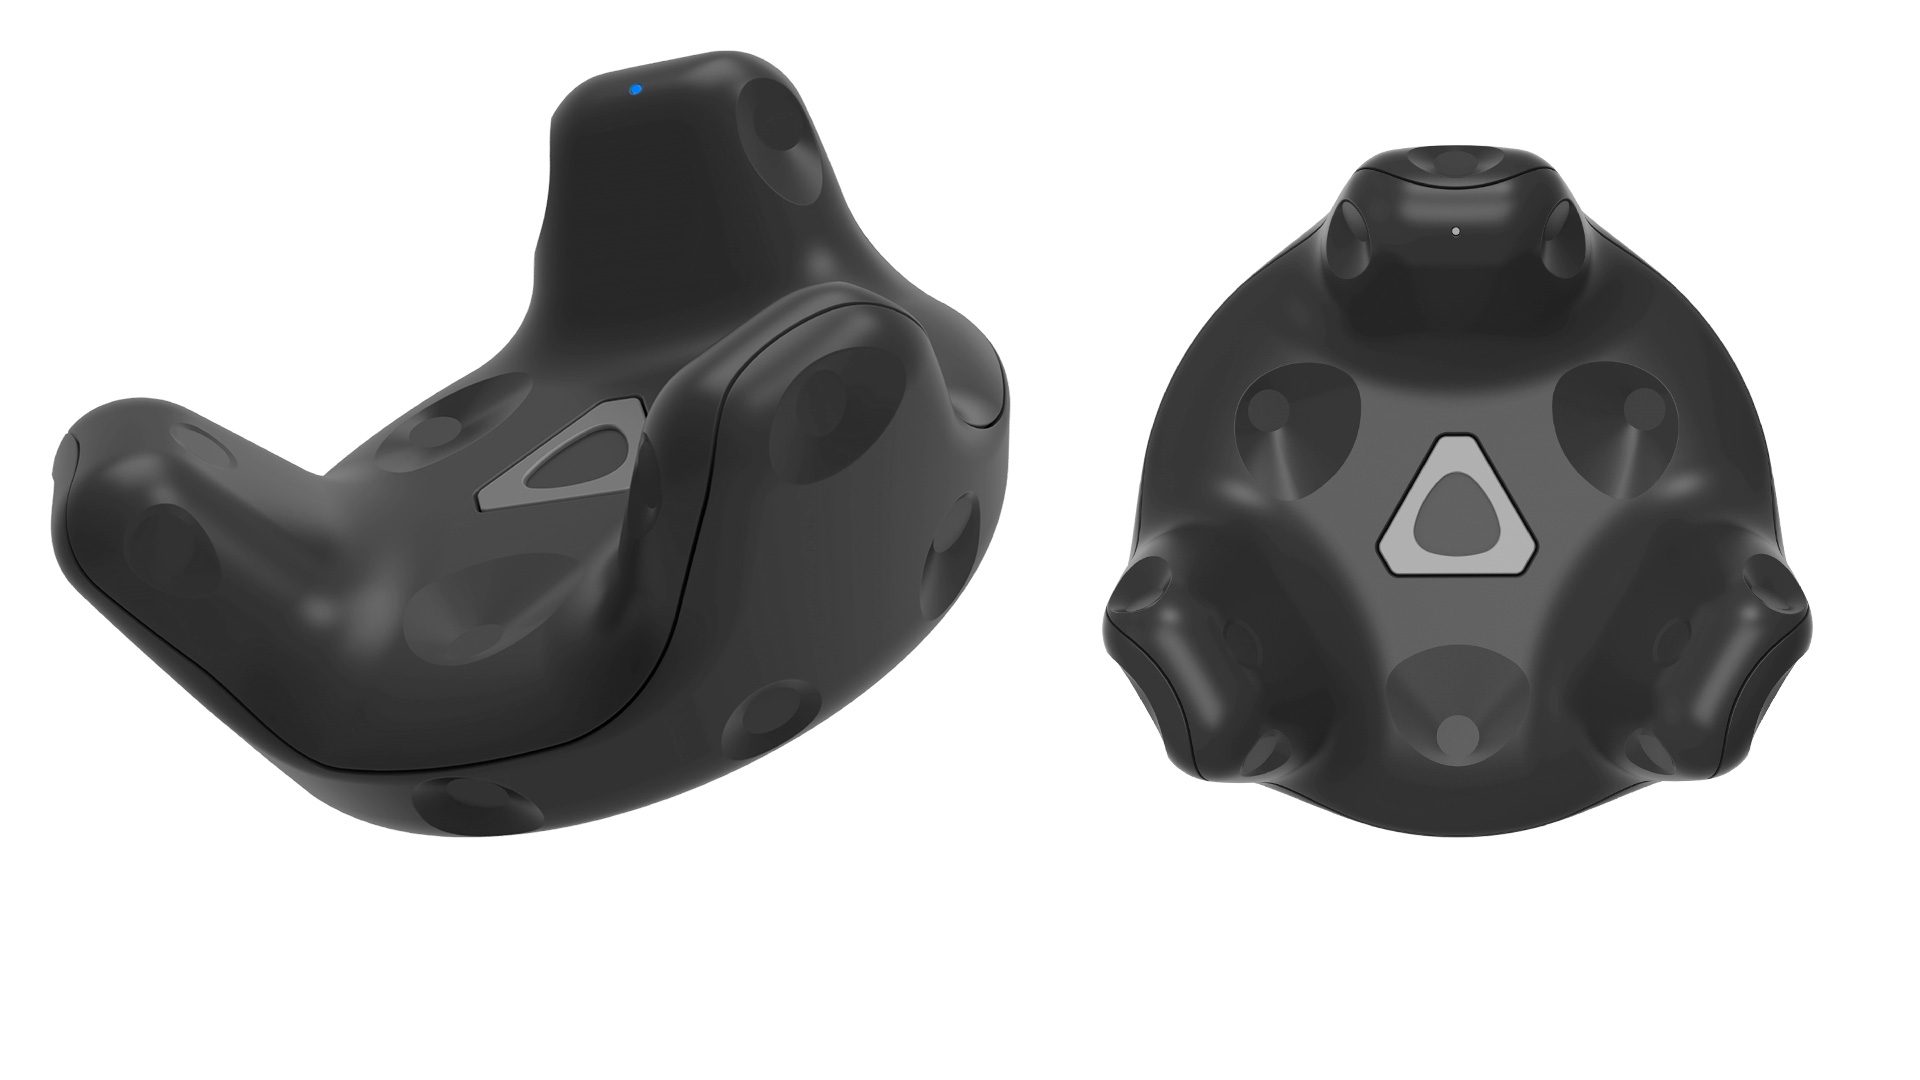 HTC to Give Away 1,000 Vive Trackers to Developers Ahead of Launch